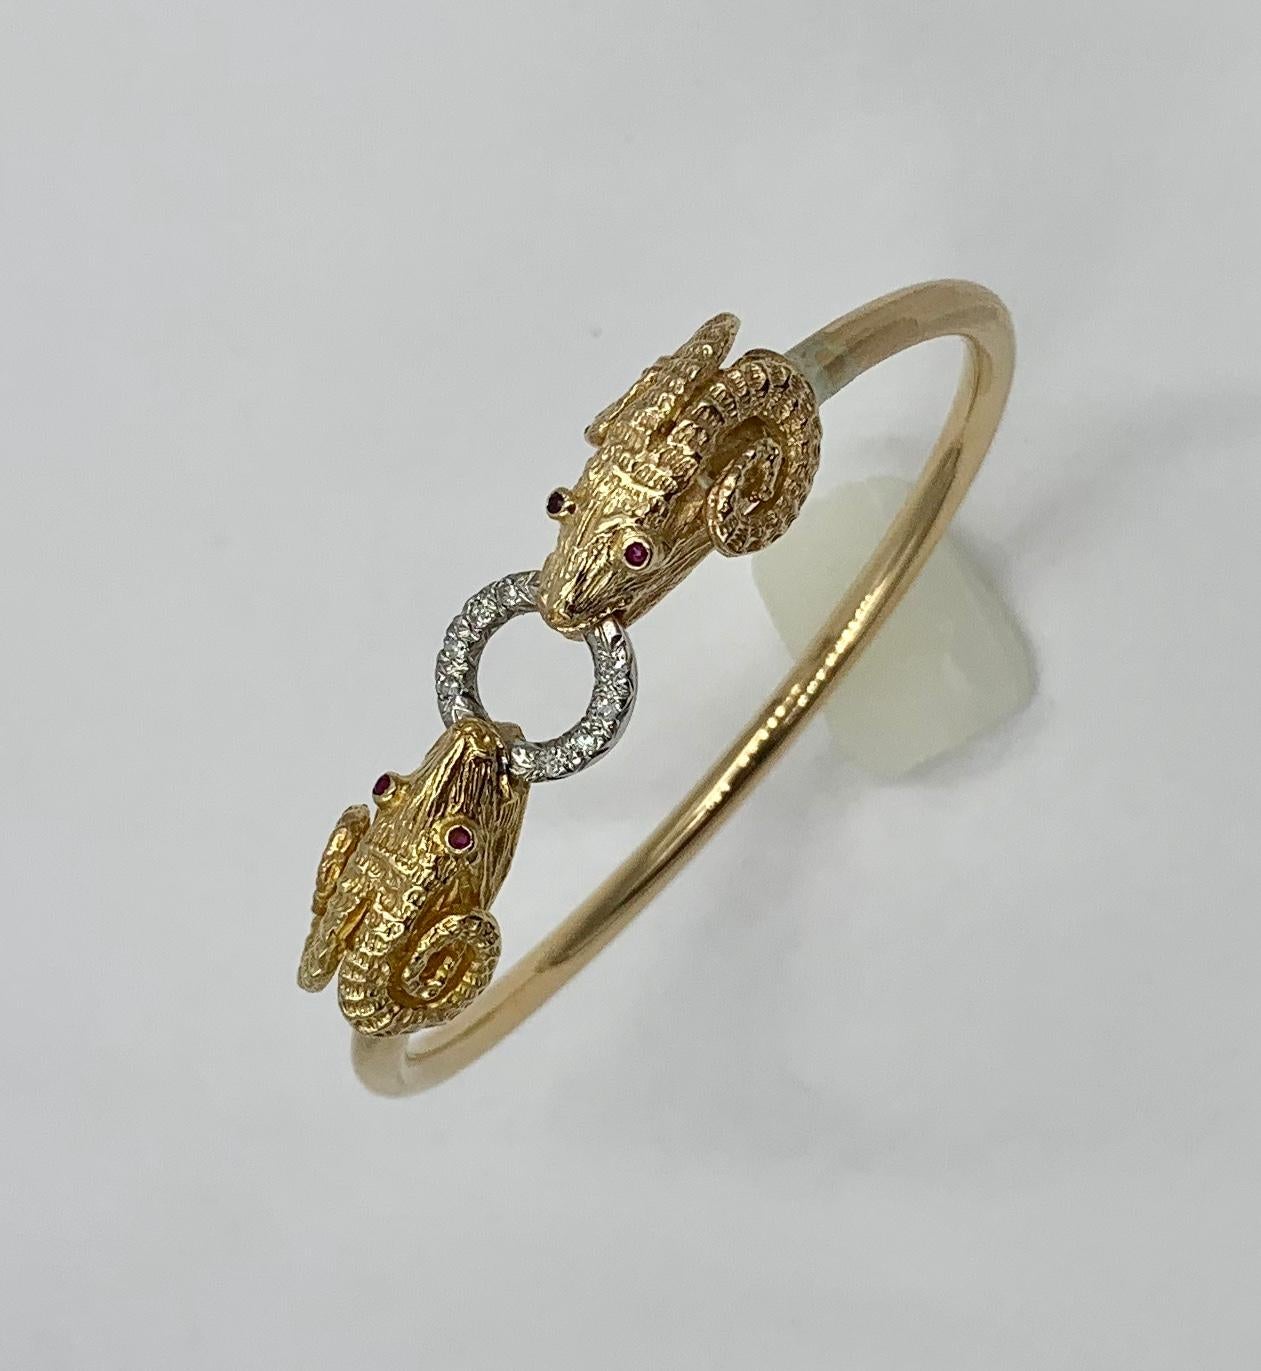 The stunning bangle bracelet is set with two Ram, Sheep, Aries heads.  The mouths of the Rams hold a Diamond circle and the eyes of the Rams are fine red Rubies.  The bracelet is a classic Greek Revival motif.  It is exquisite with beautiful three